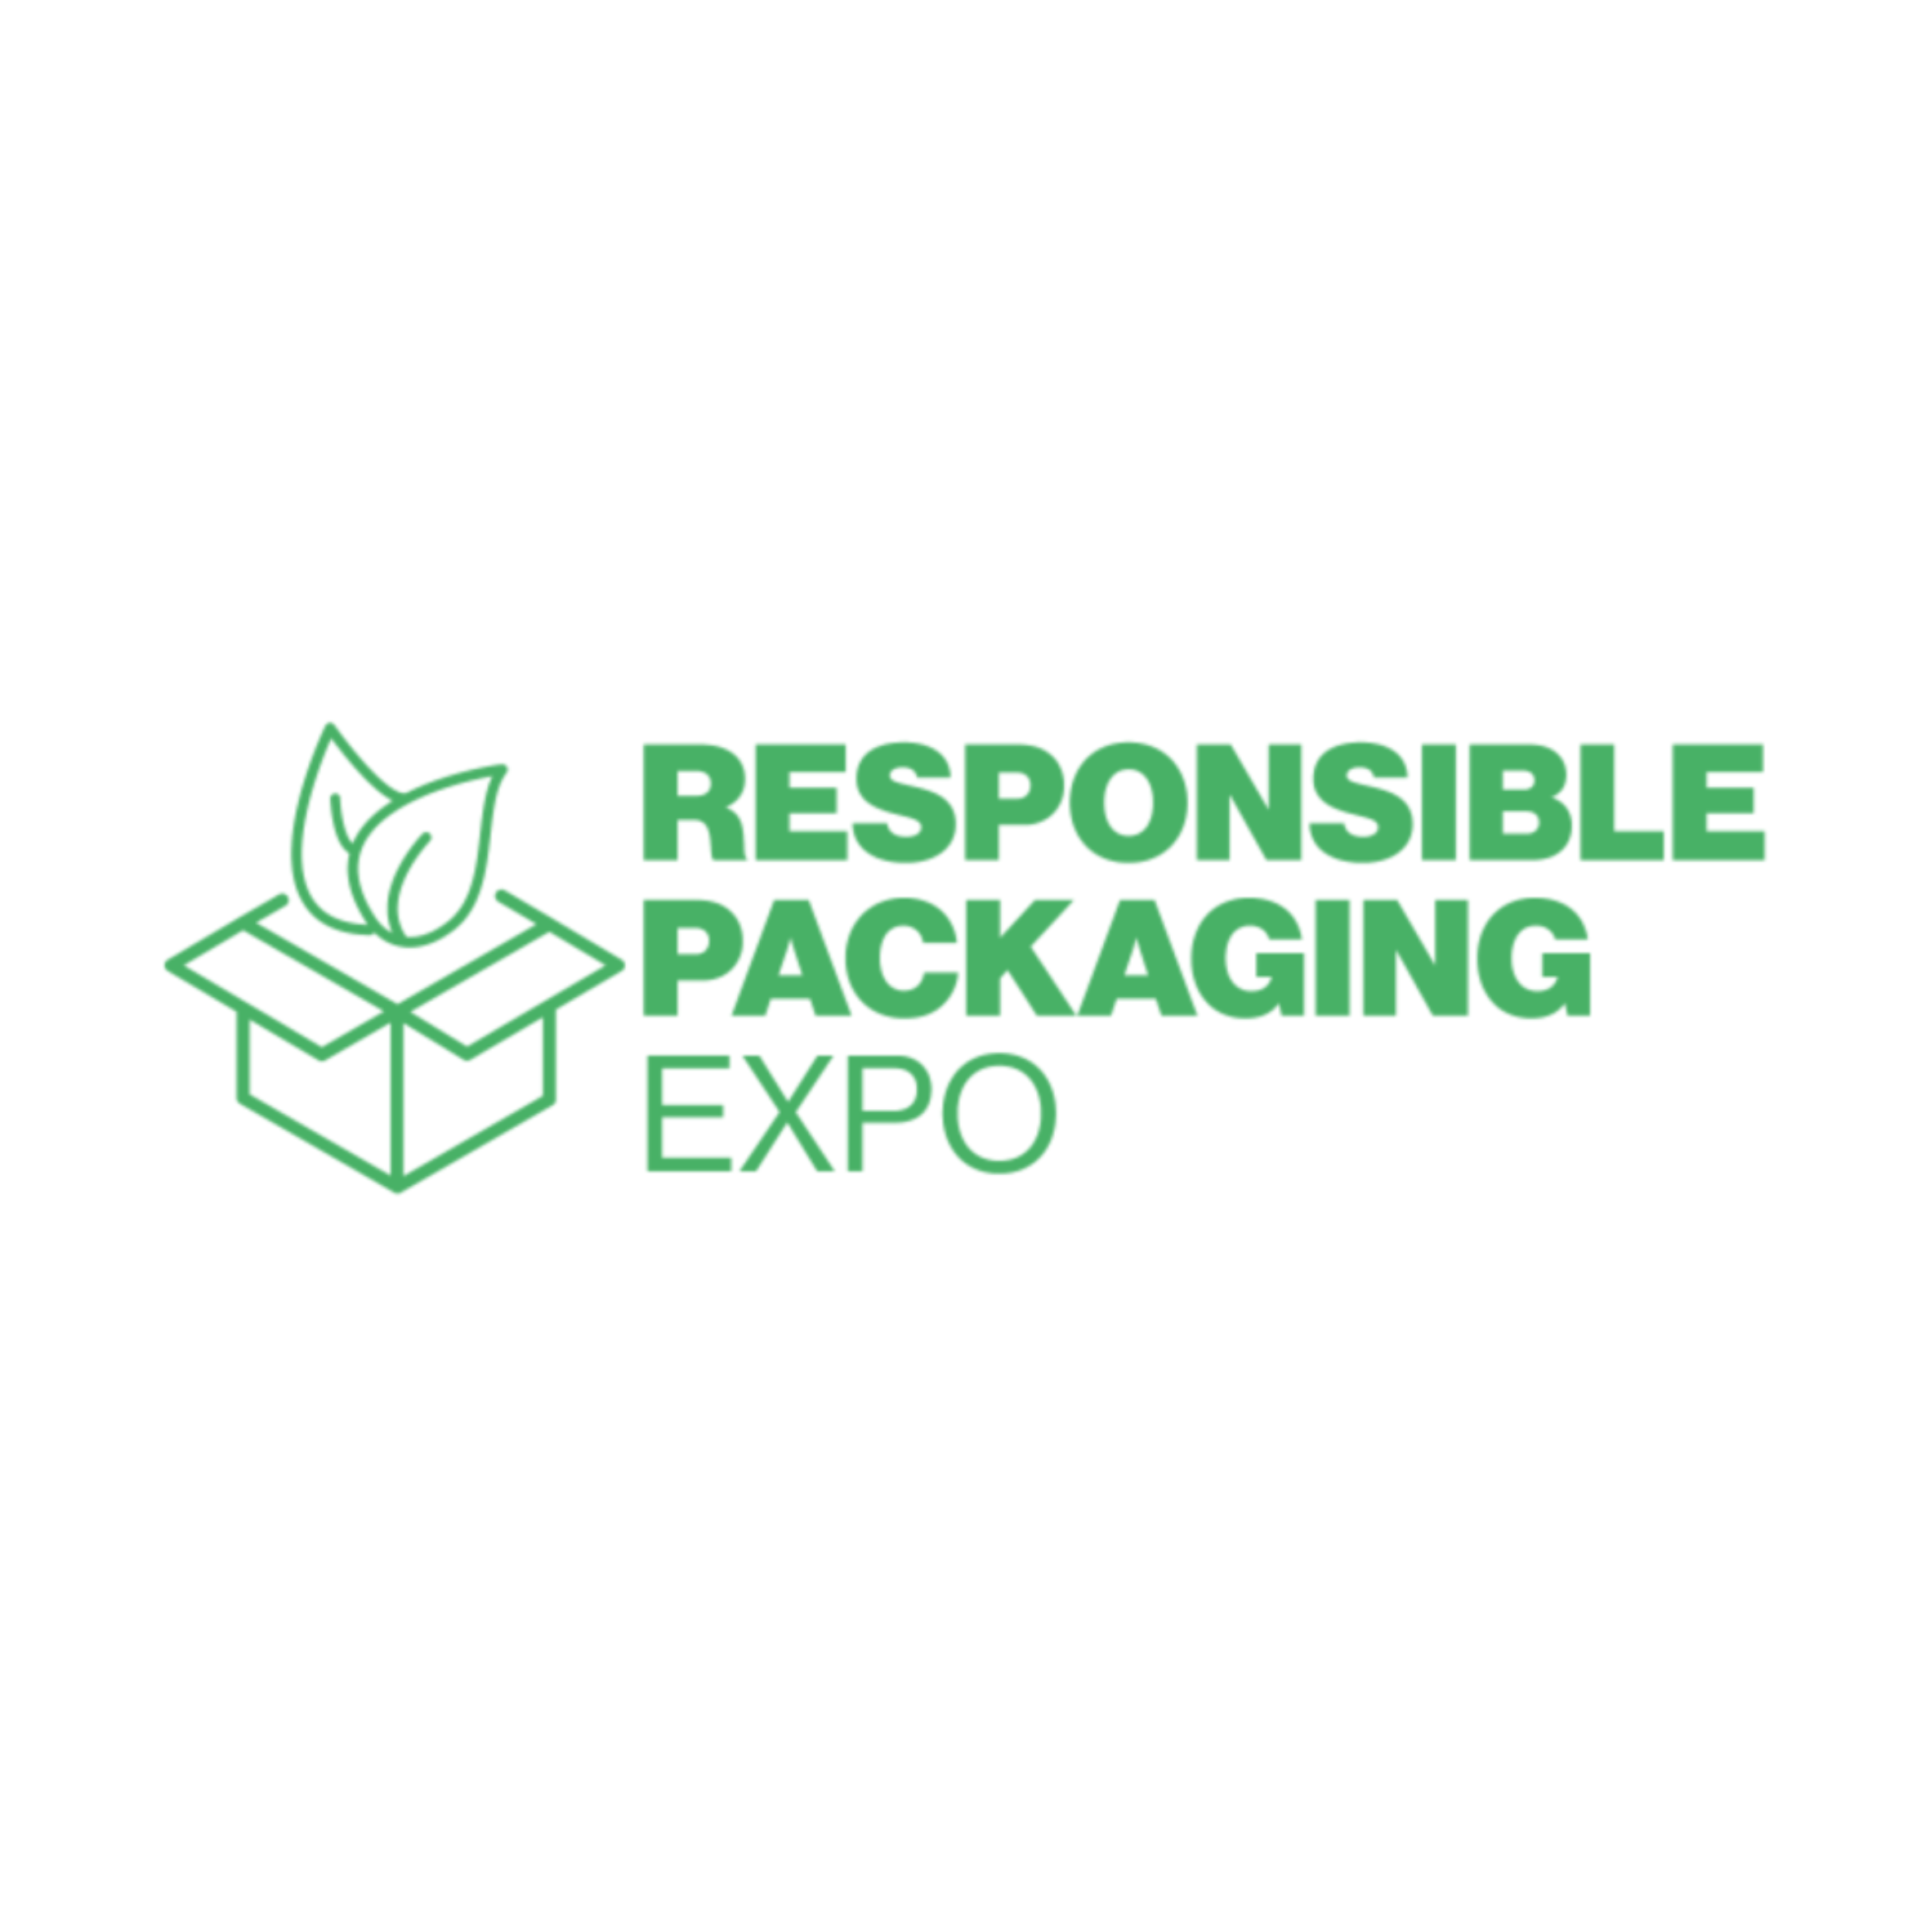 Responsible Packaging Expo